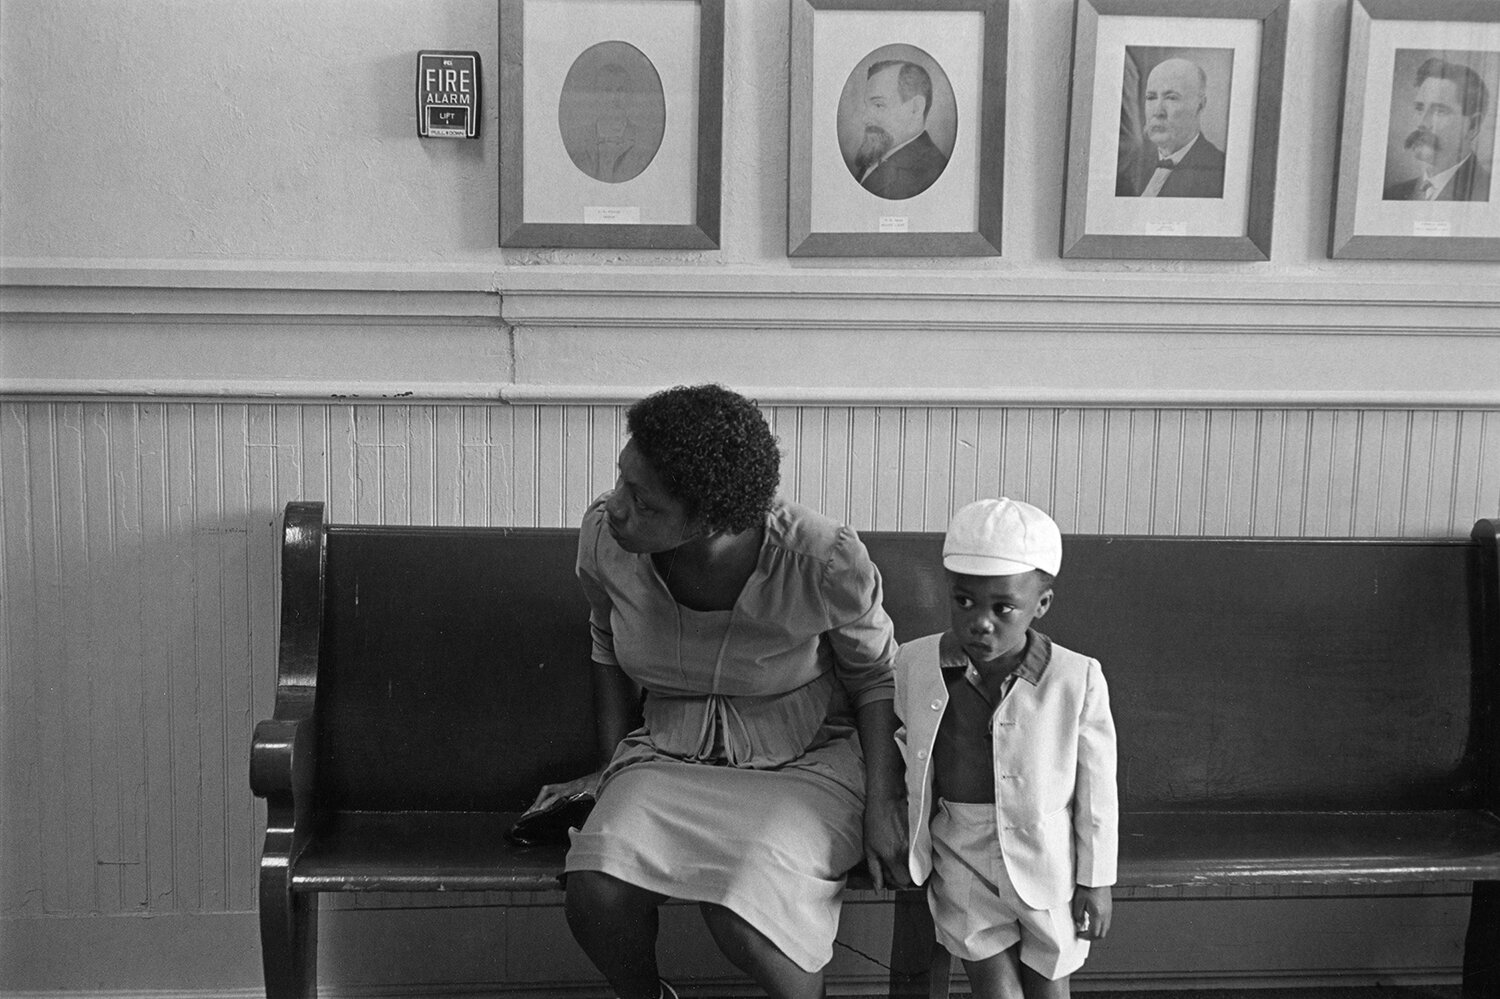   Outside Courtroom , 1982 Silver Gelatin Print 11 x 14 in. (paper size) The Do Good Fund, Inc., 2017-61 